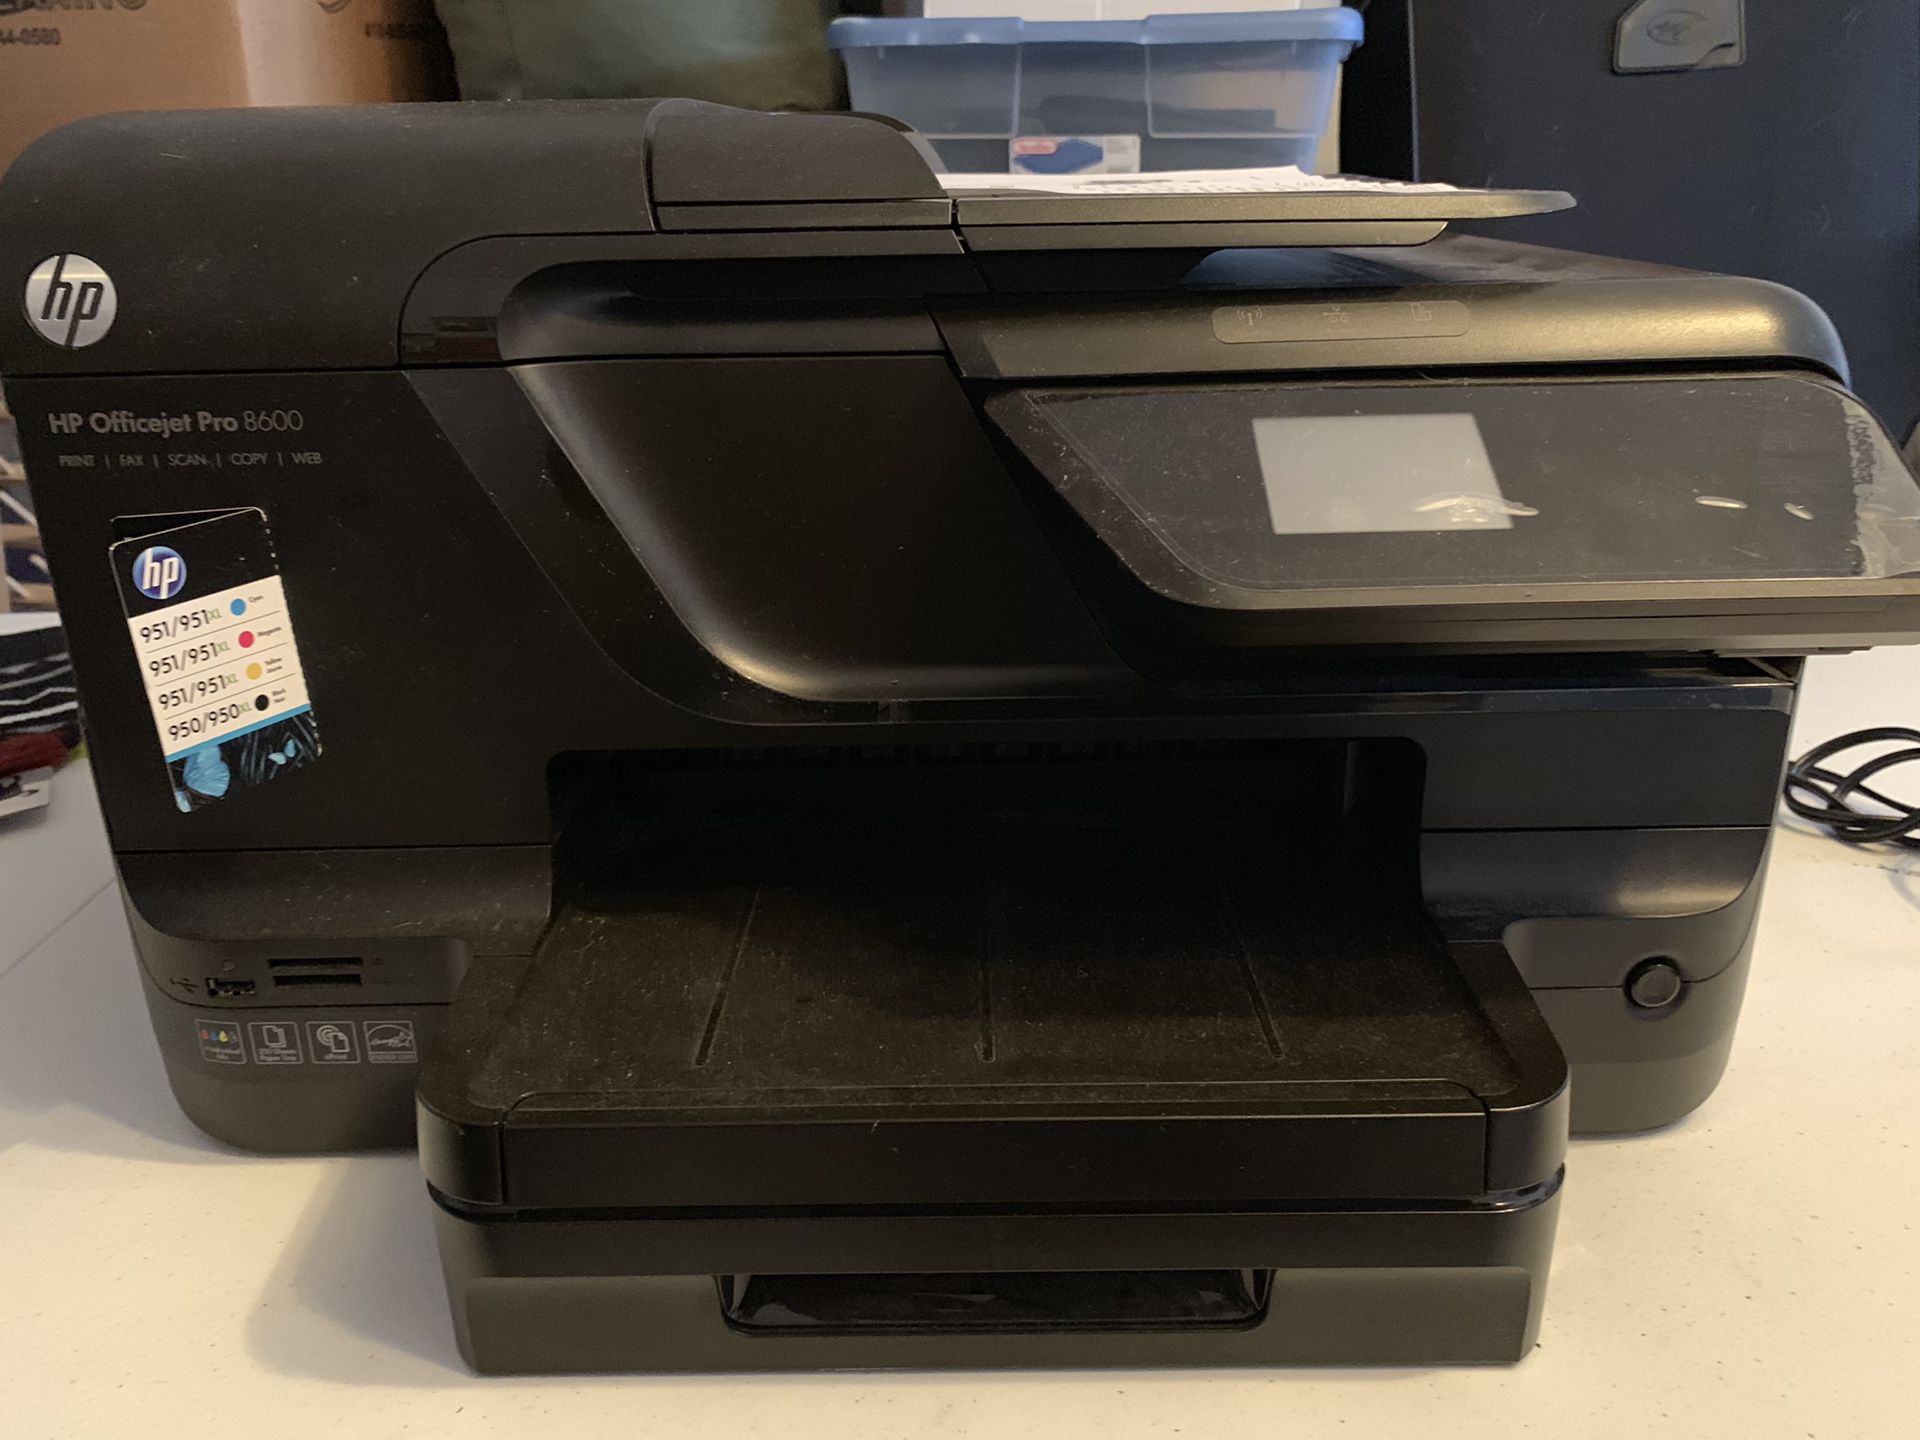 HP Officejet Pro 8600 e-All-in-On Wireless Color Printer with Scanner, Copier & Fax